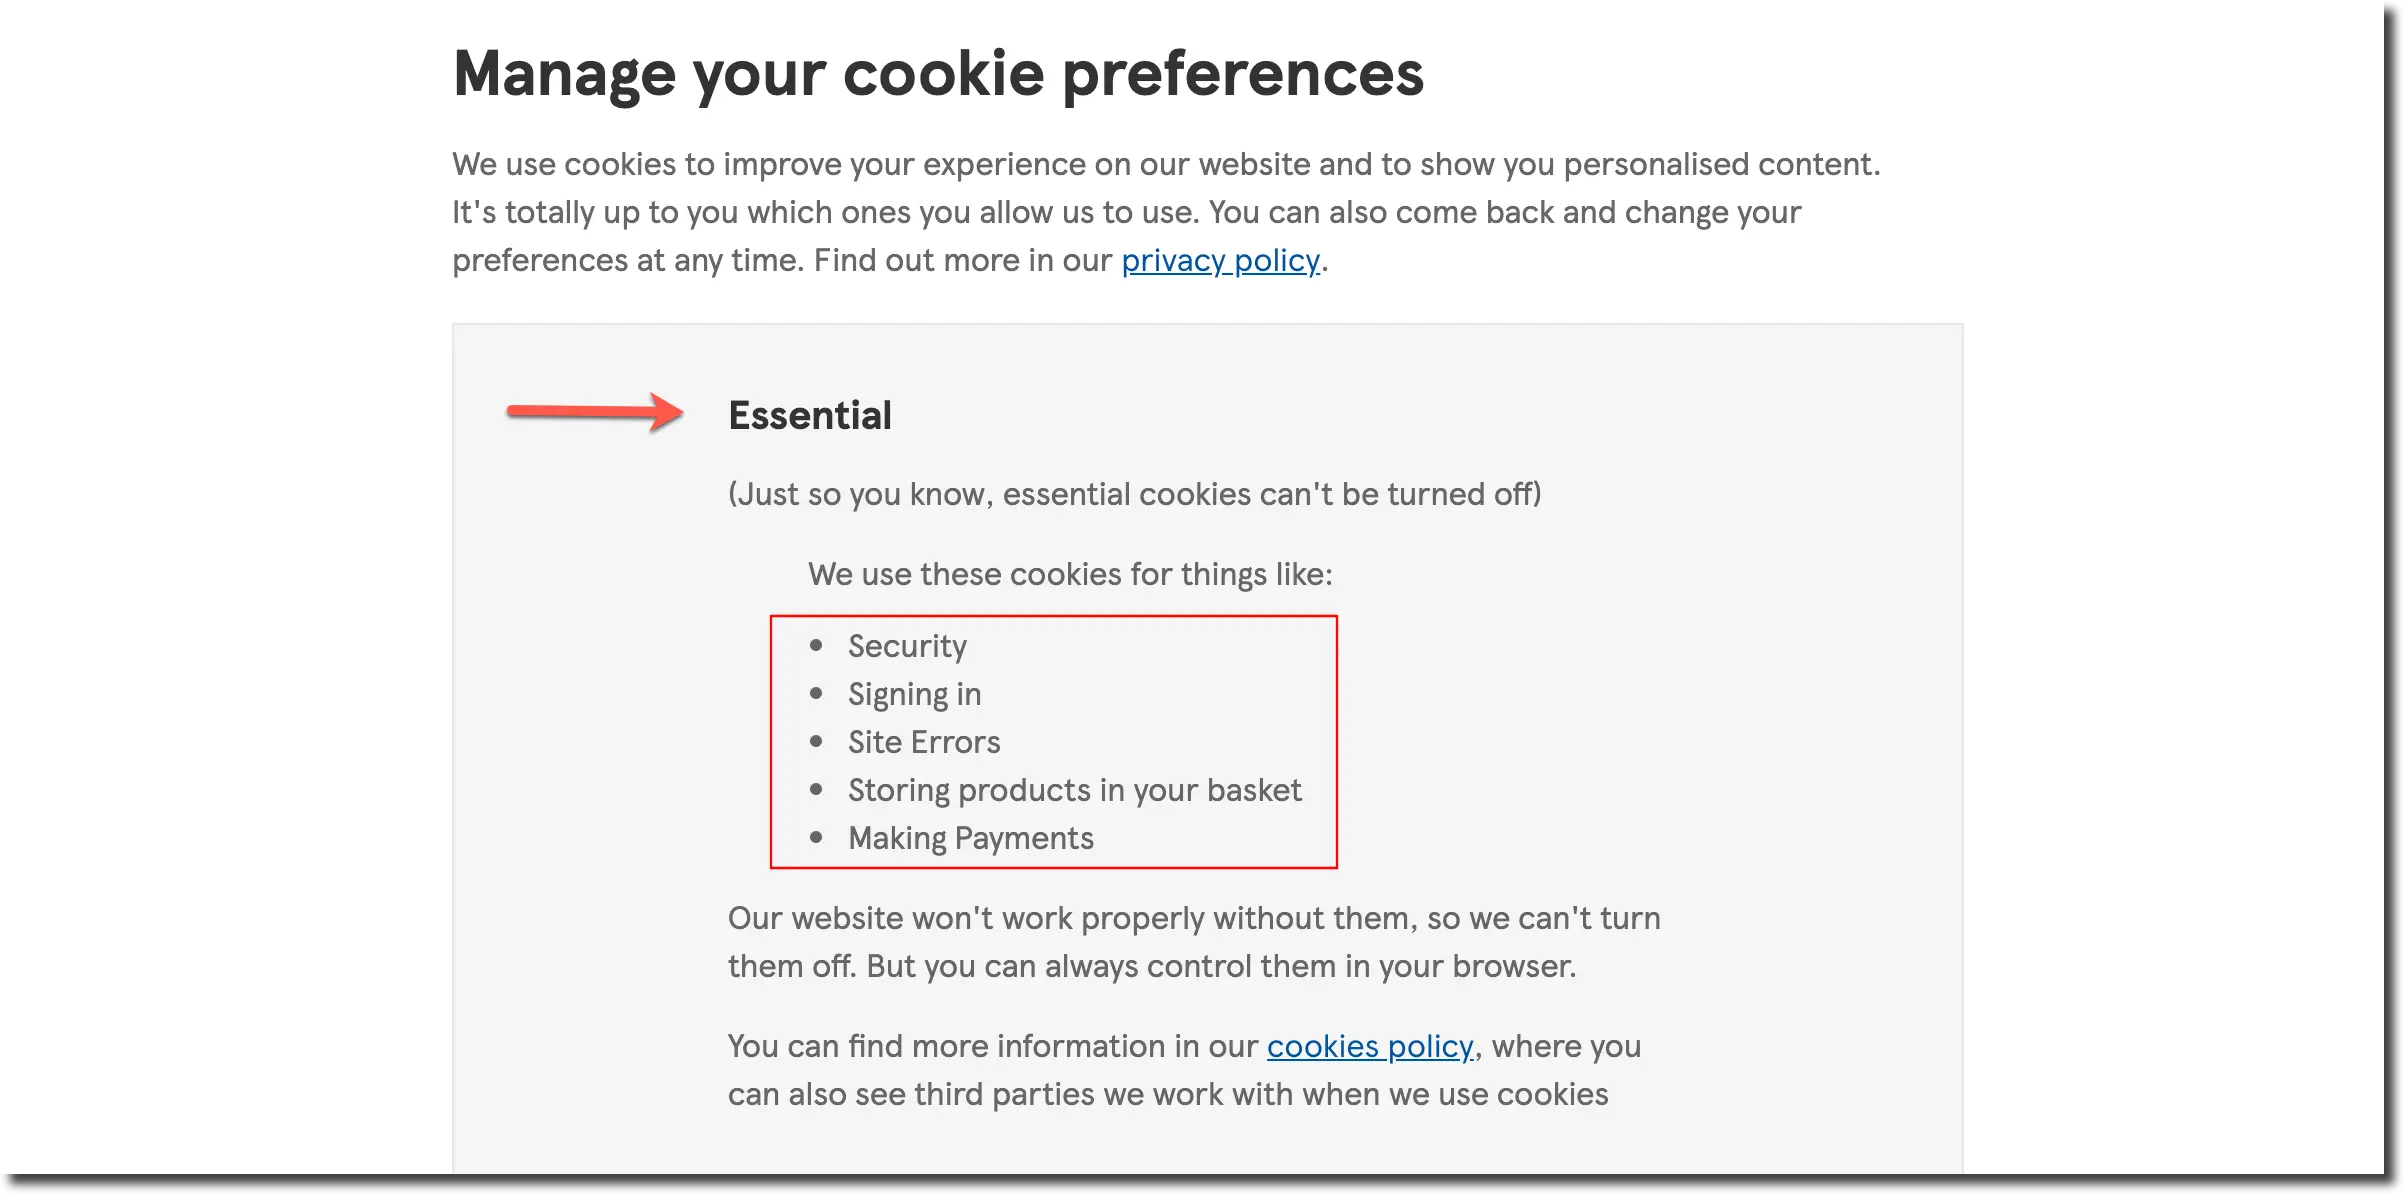 First-party data. Essential cookies